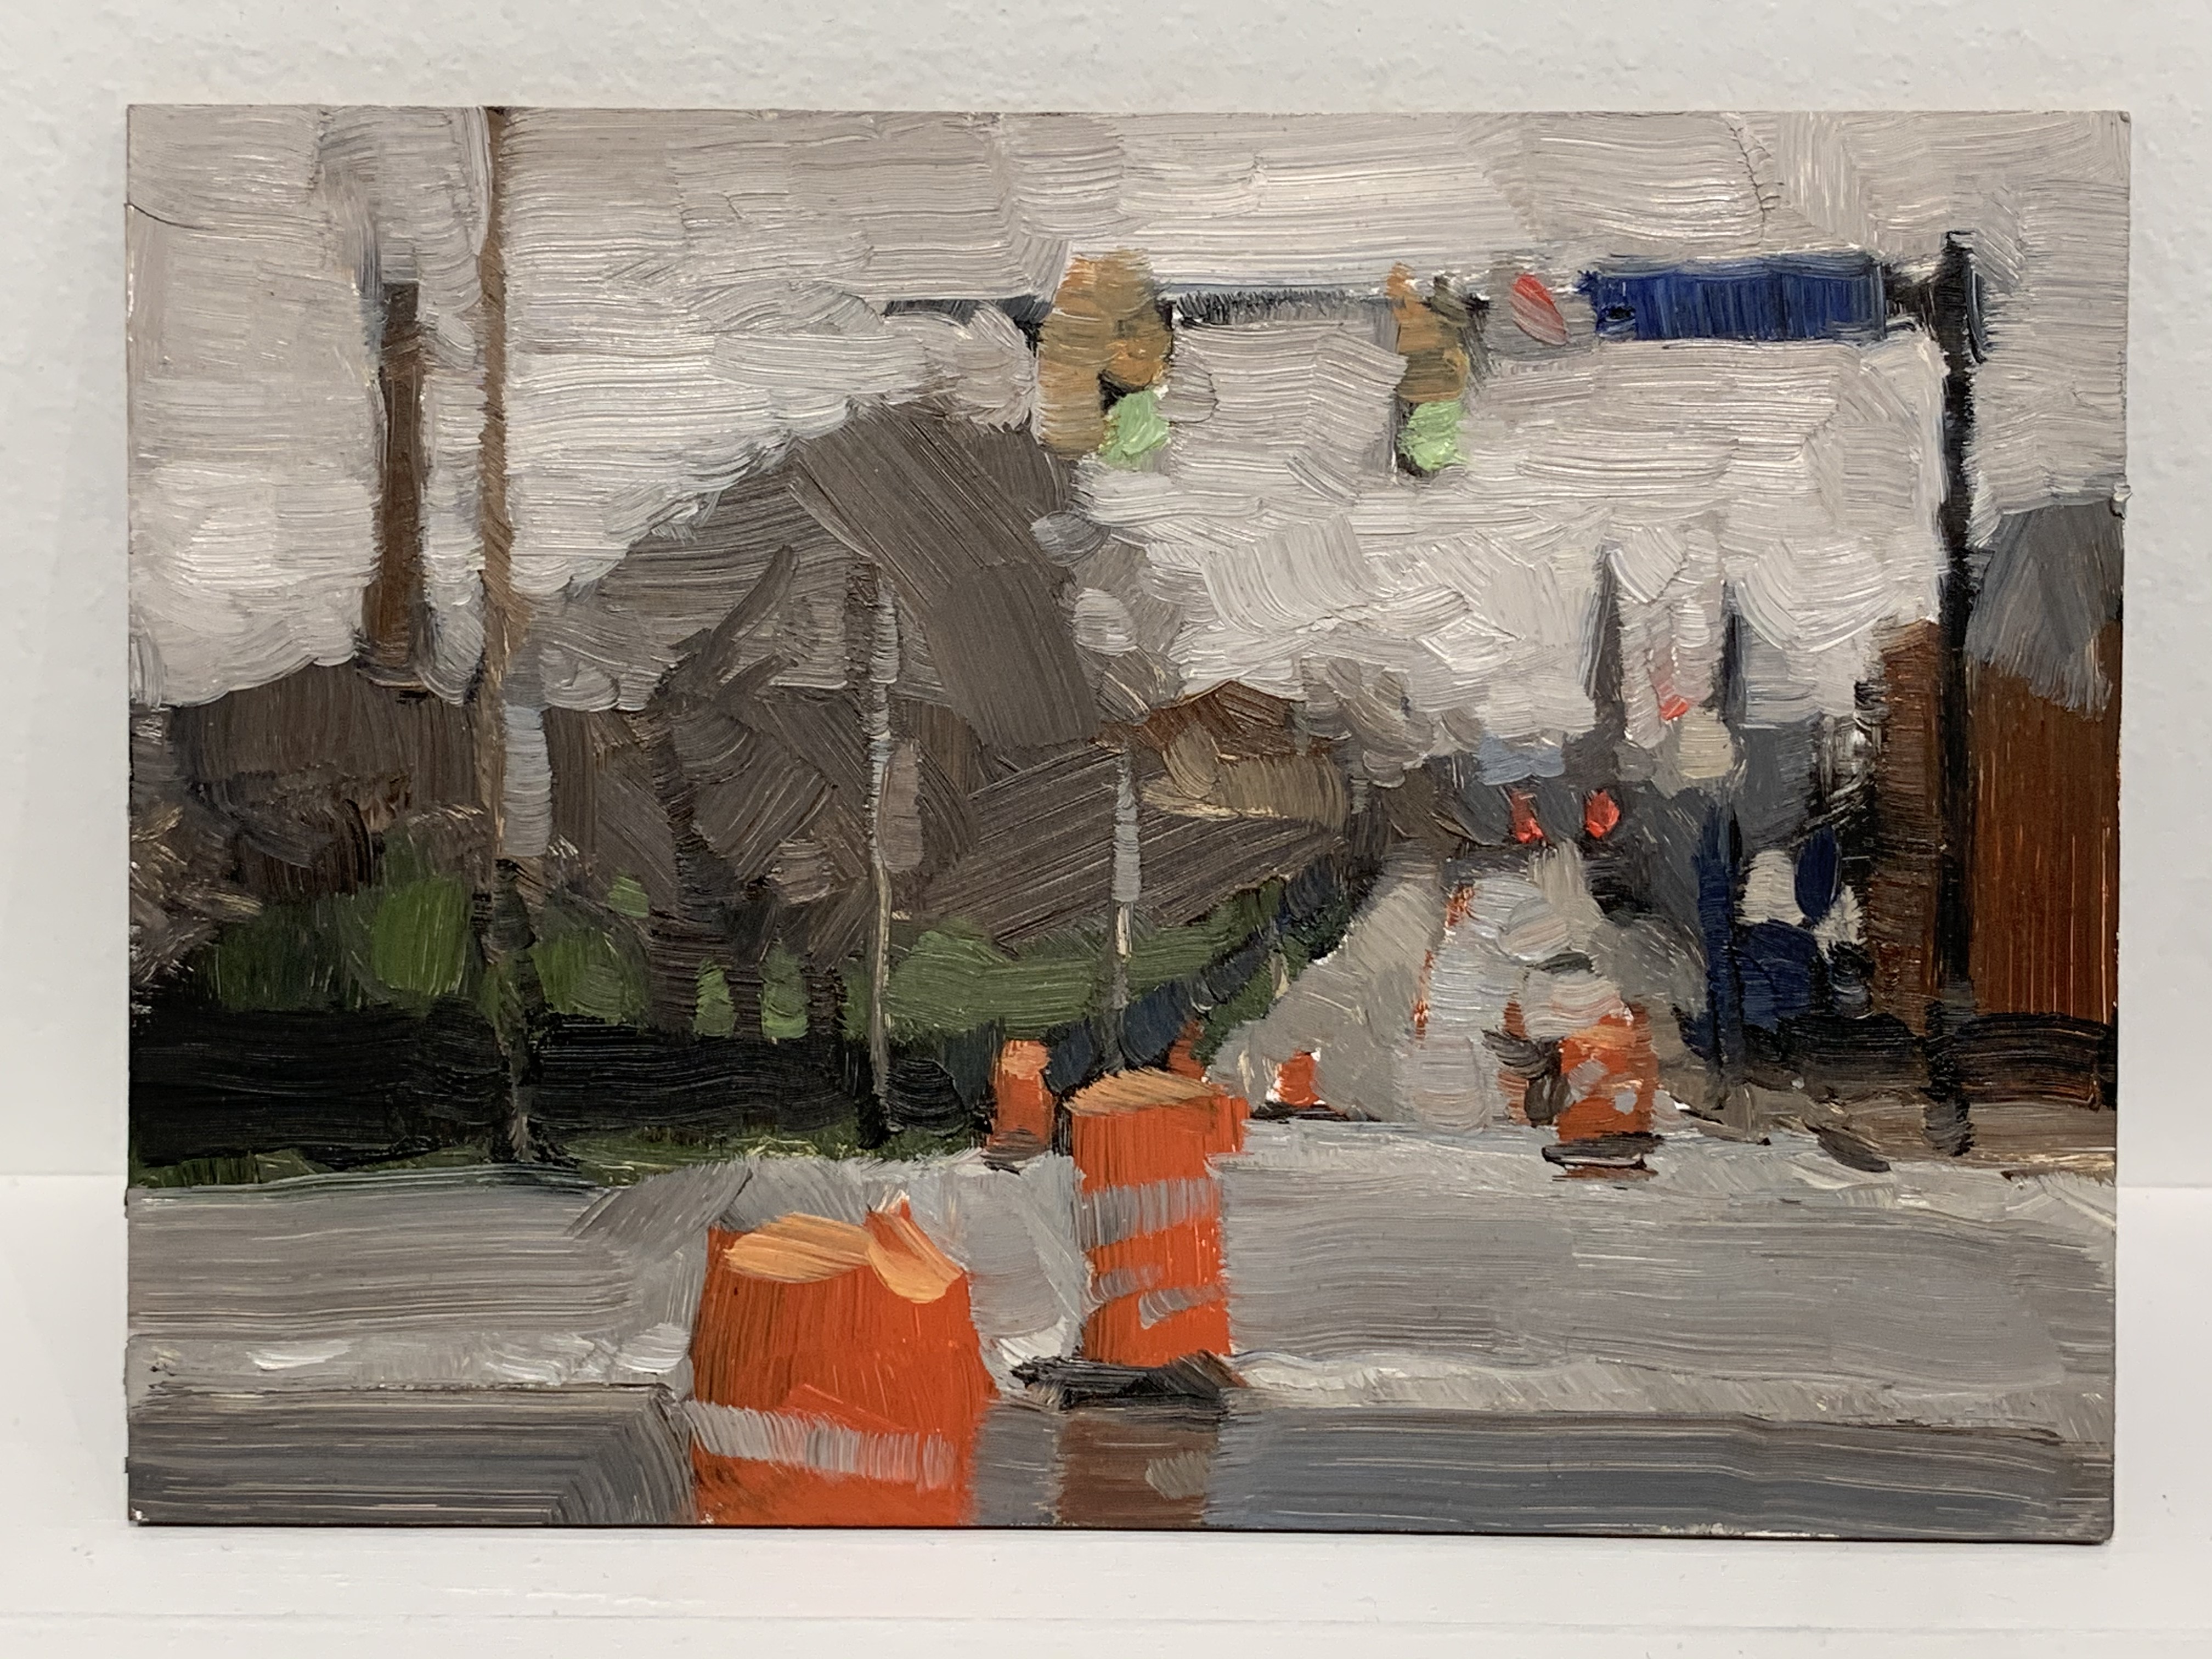 Adrian Eisenhower finds visual delight on orange barrels on a rainy day in Cleveland, in a work on view at Abattoir gallery.